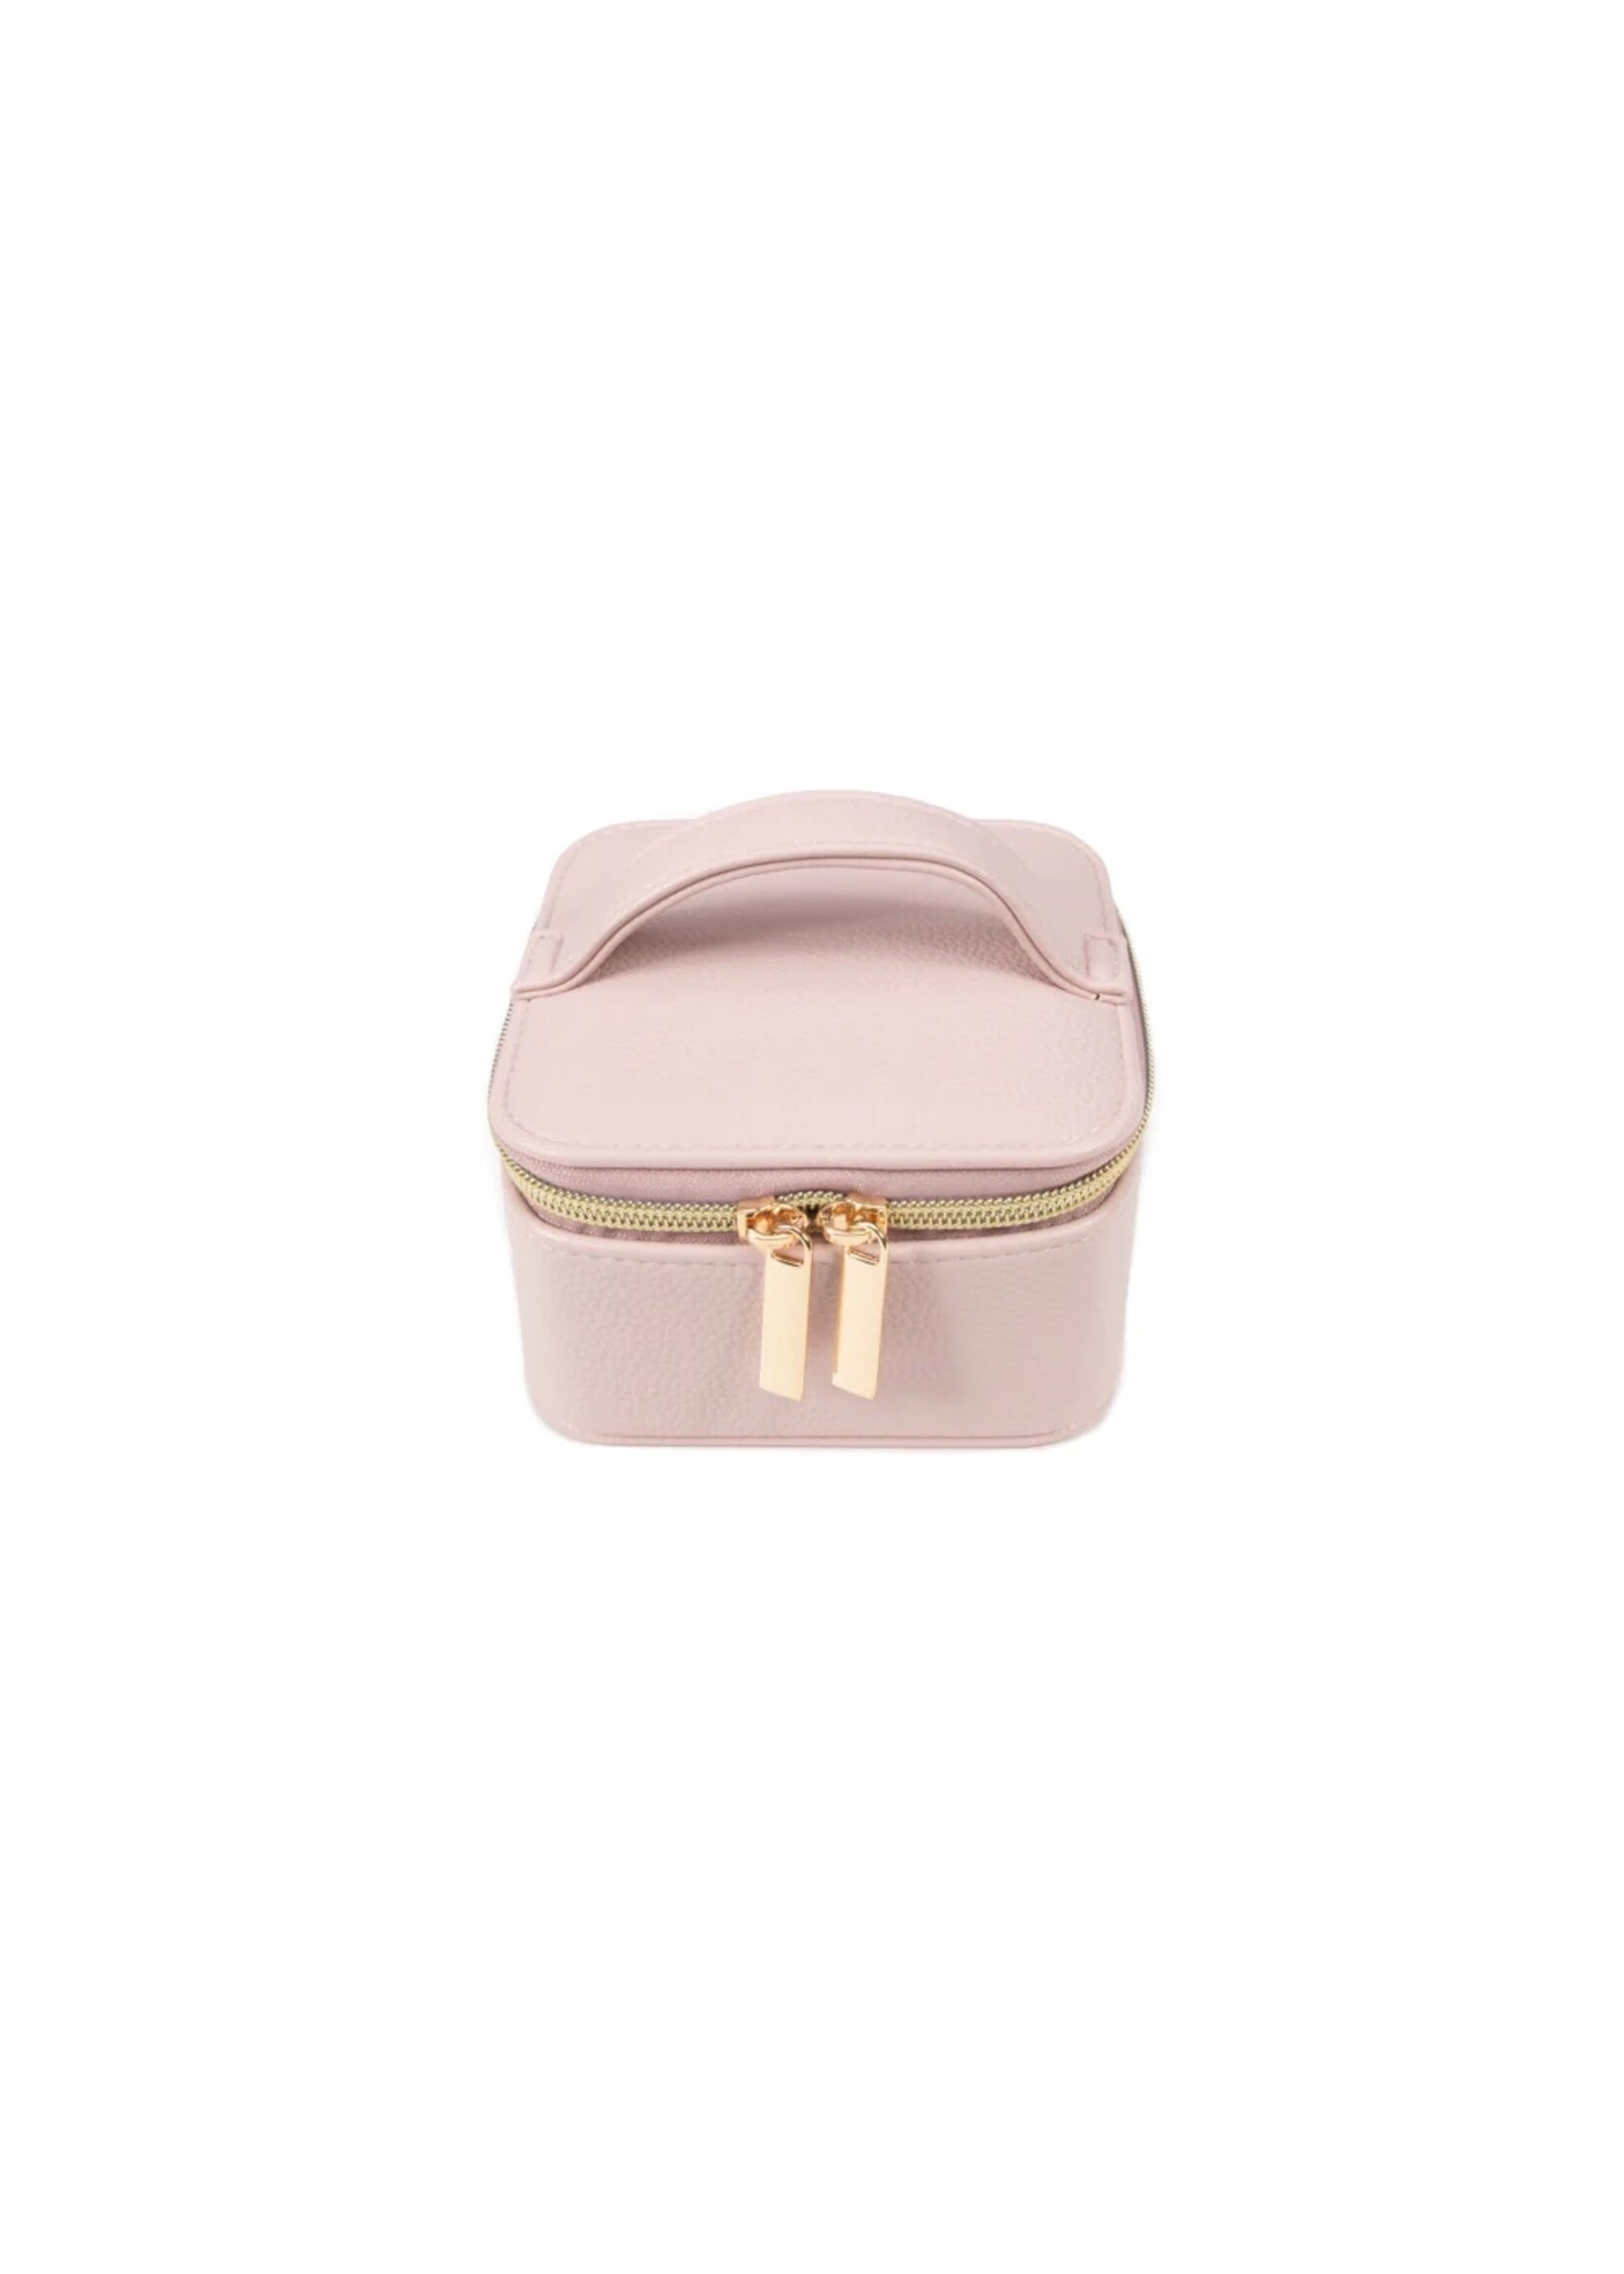 Brouk & Co Leah Travel Jewelry Case with Pouch